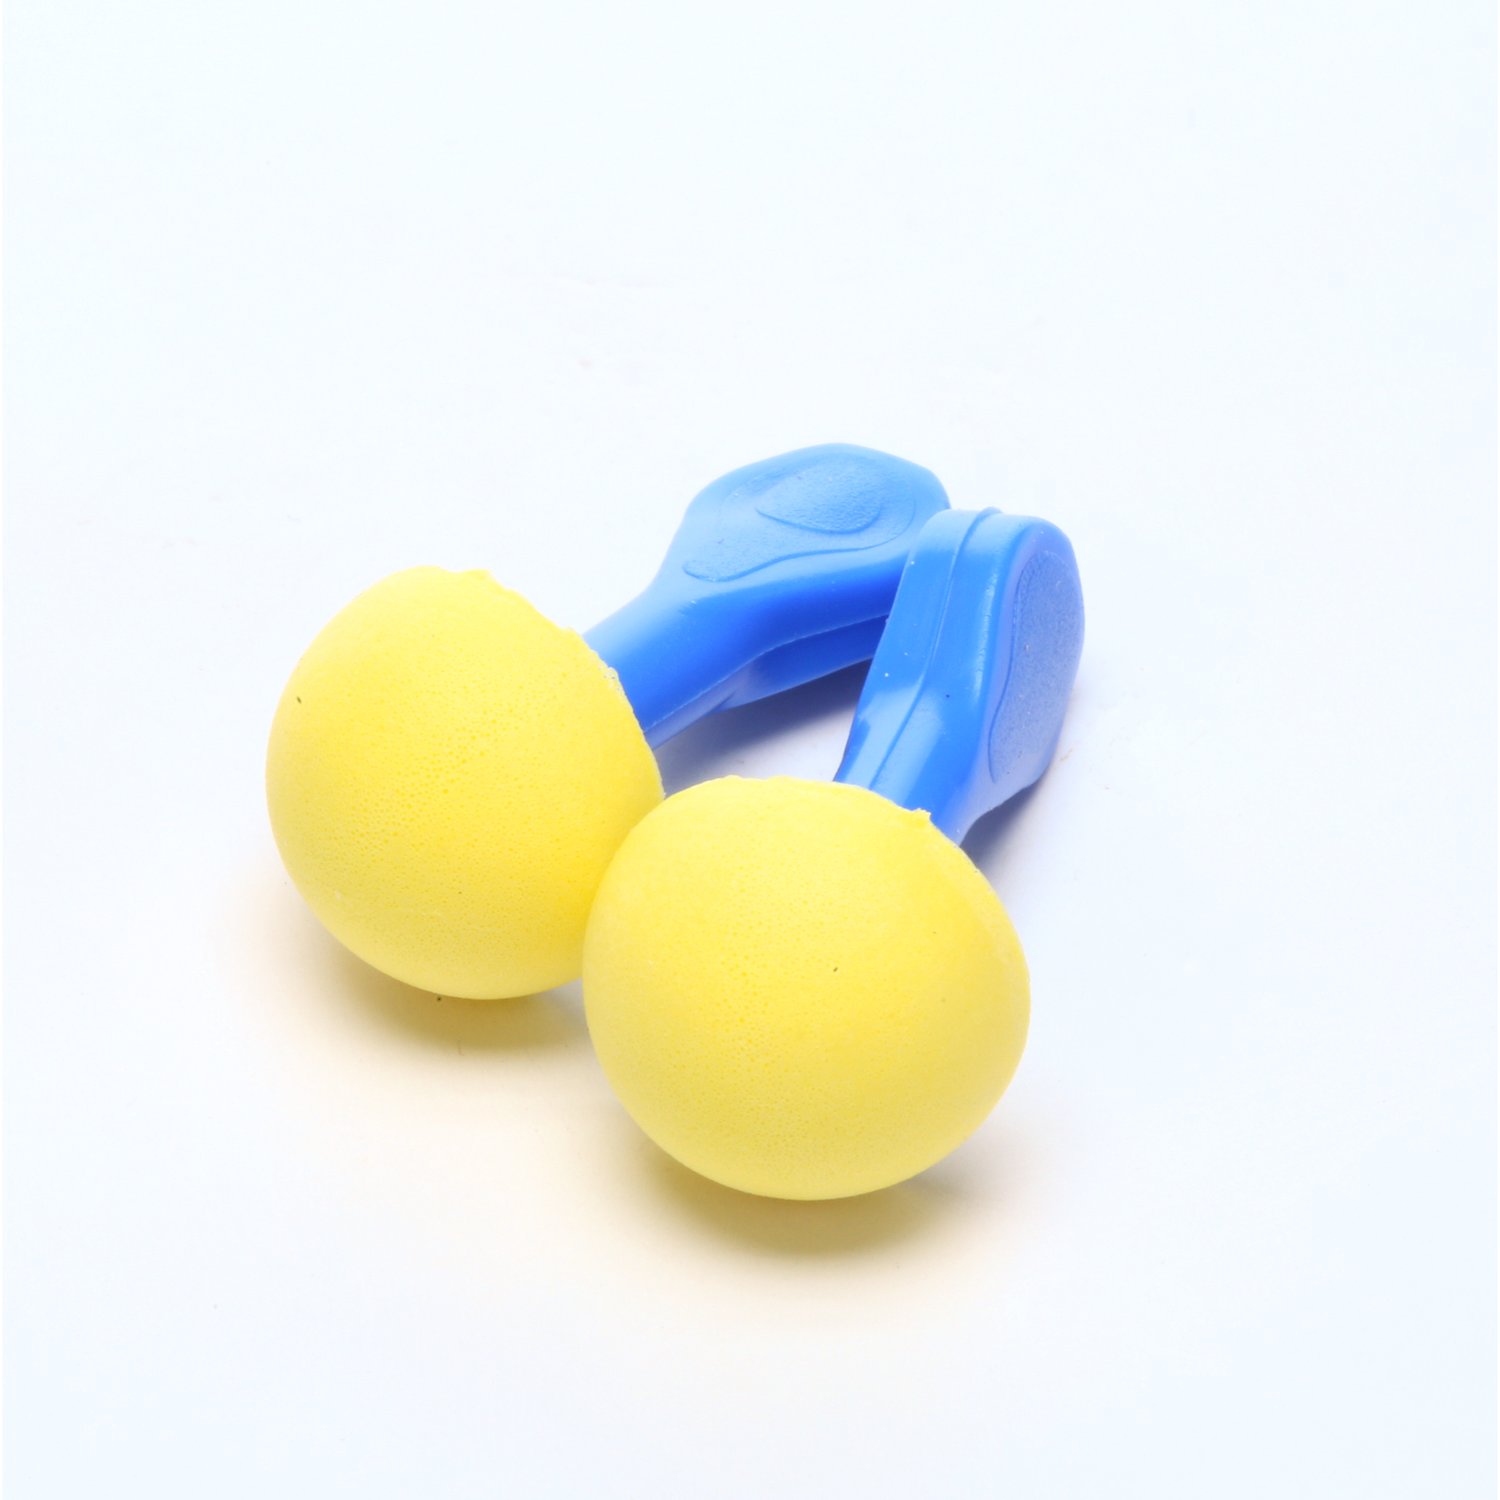 7000127178 - 3M E-A-R EXPRESS Pod Plugs Earplugs 321-2100, Uncorded, Blue Grips,
Pillow Pack, 400 Pair/Case